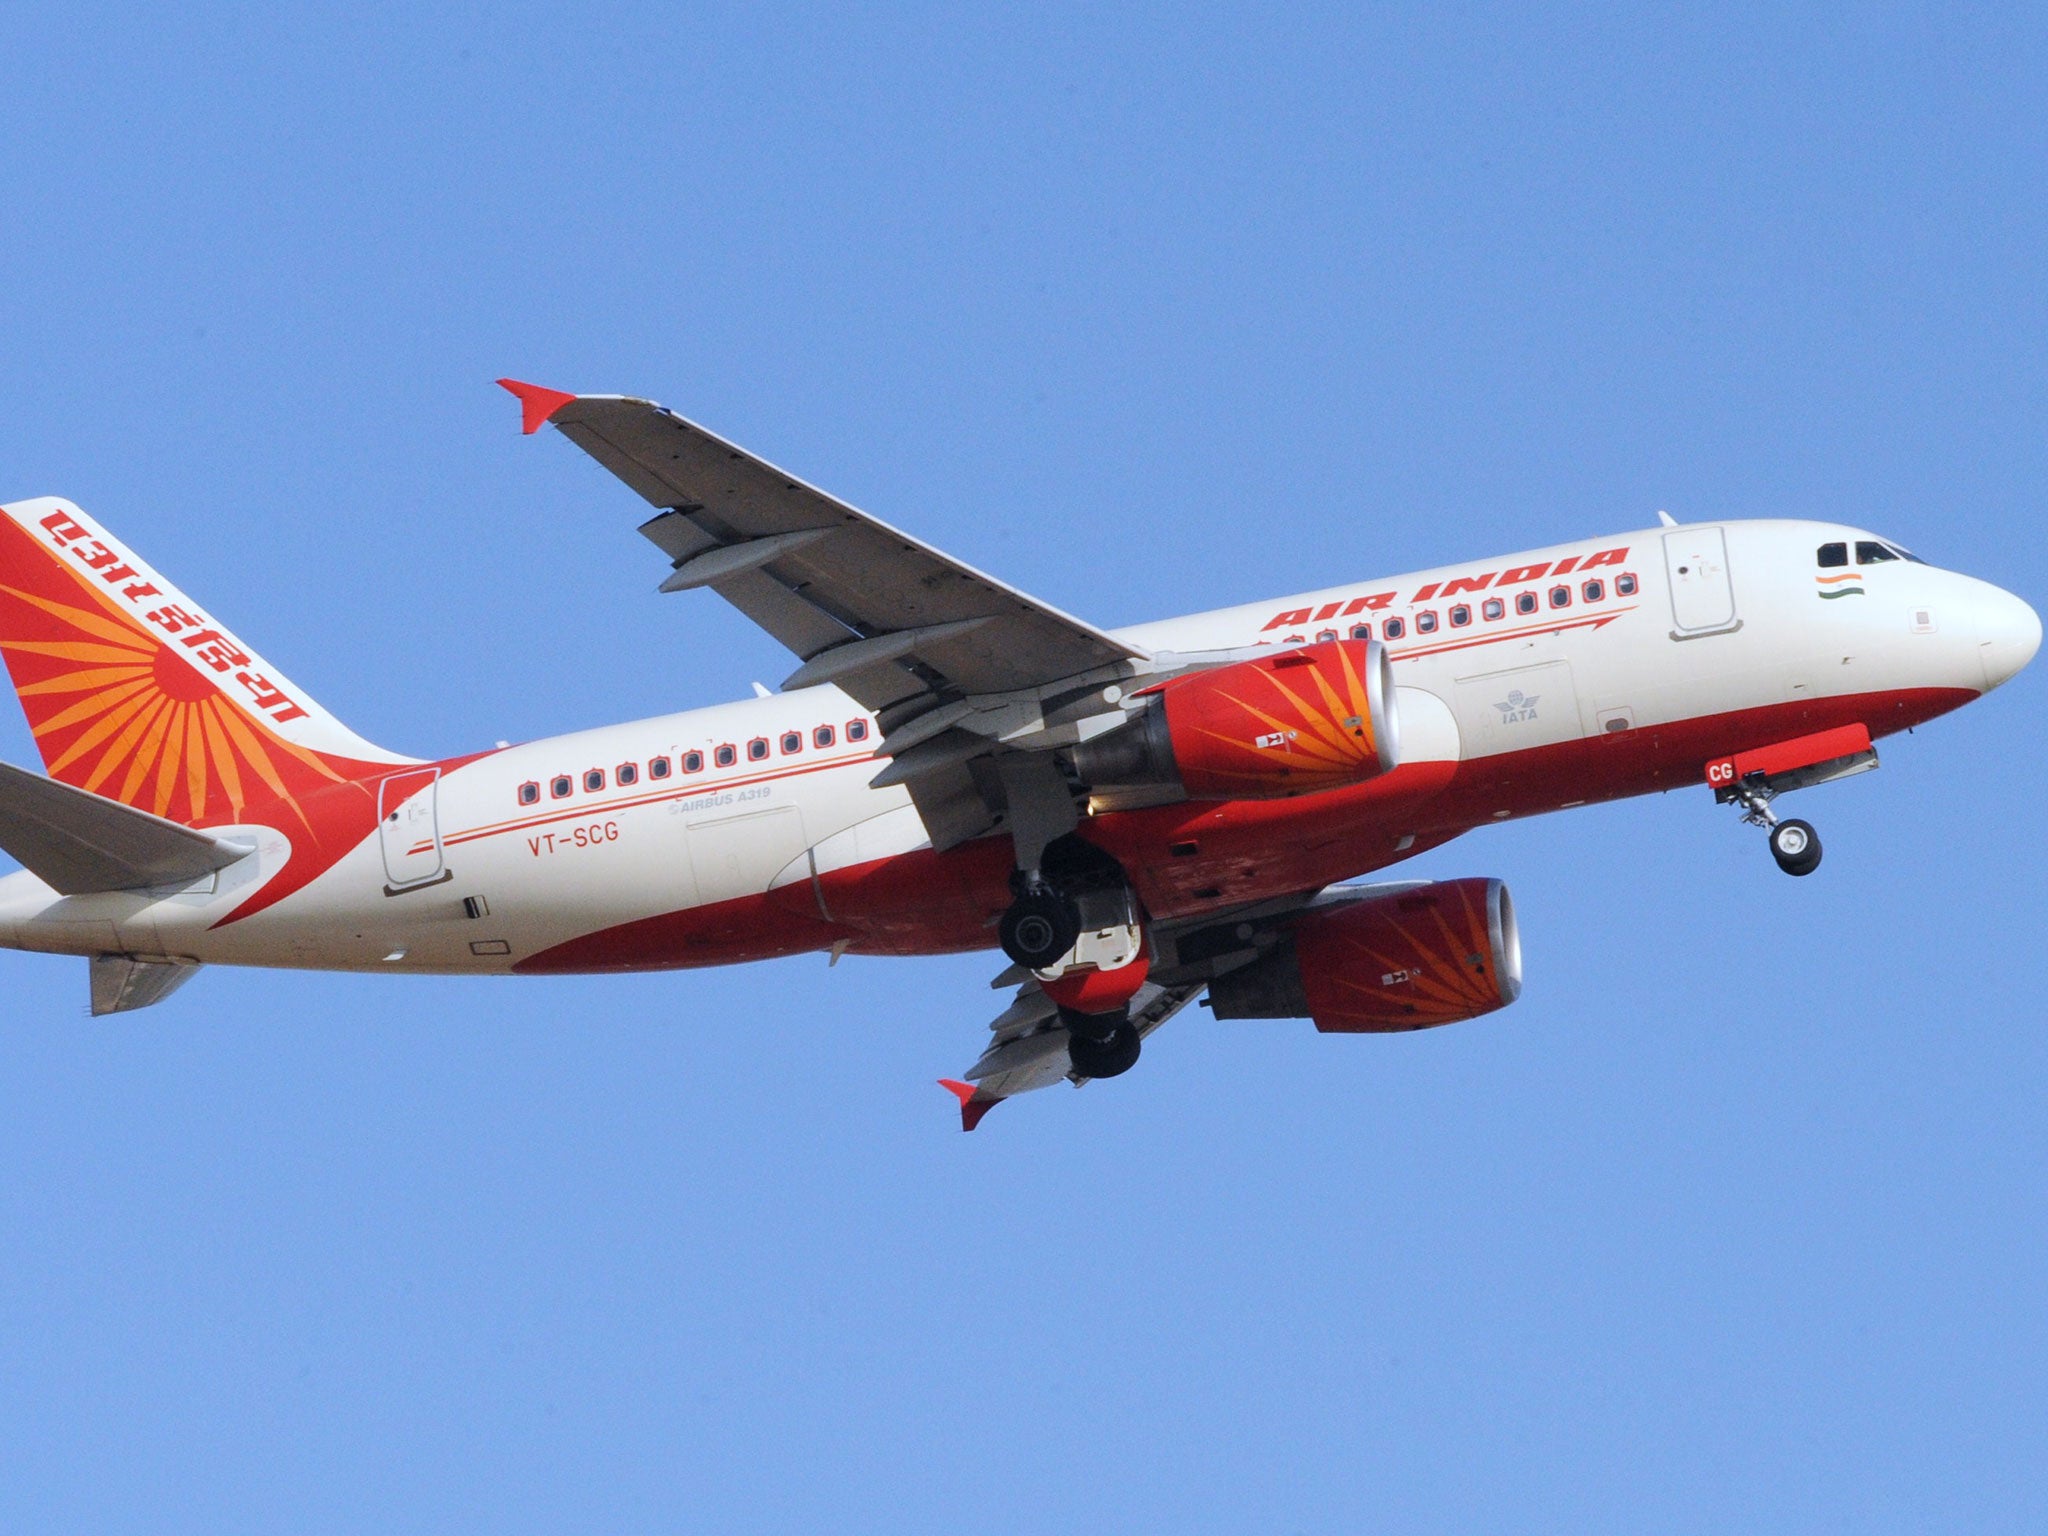 Air India introduced the changes after a spate of sexual assaults on board its planes